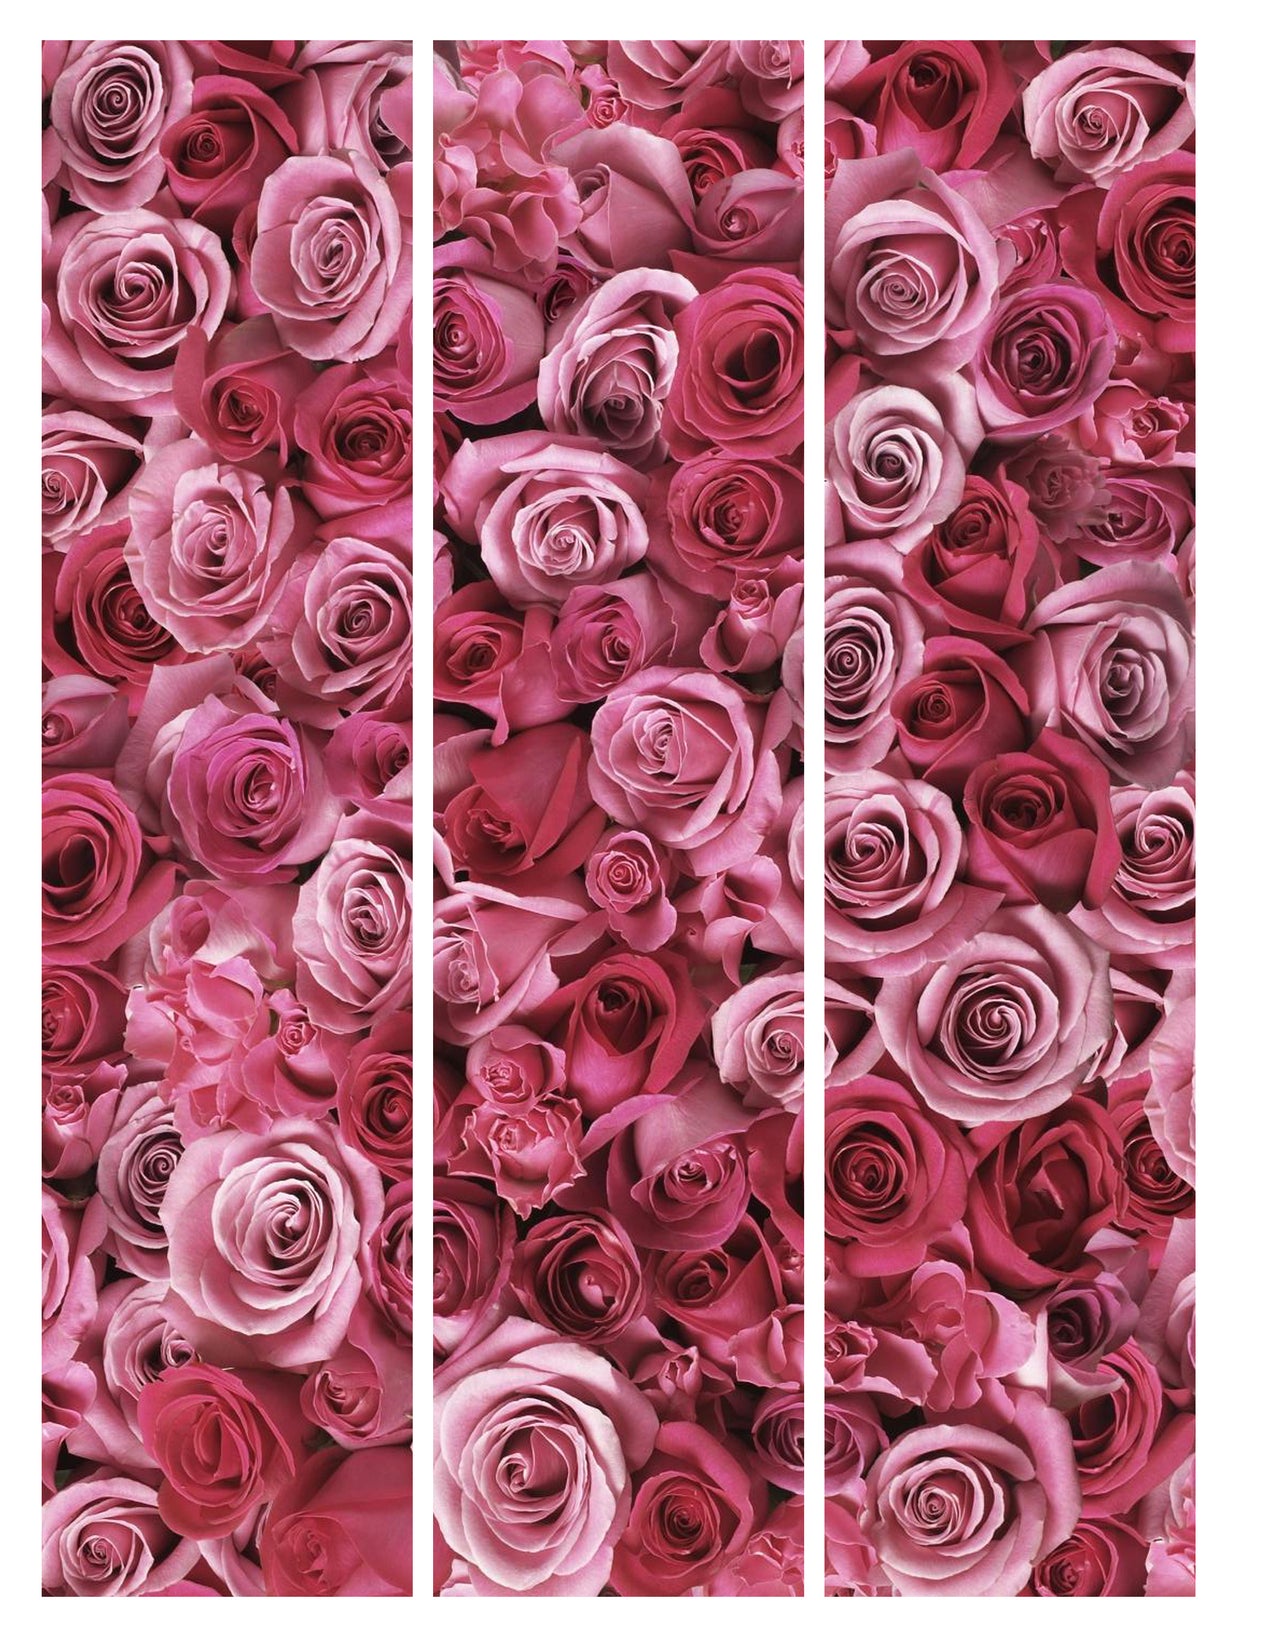 Pink Roses Pattern Edible Cake Topper Image Strips ABPID14817